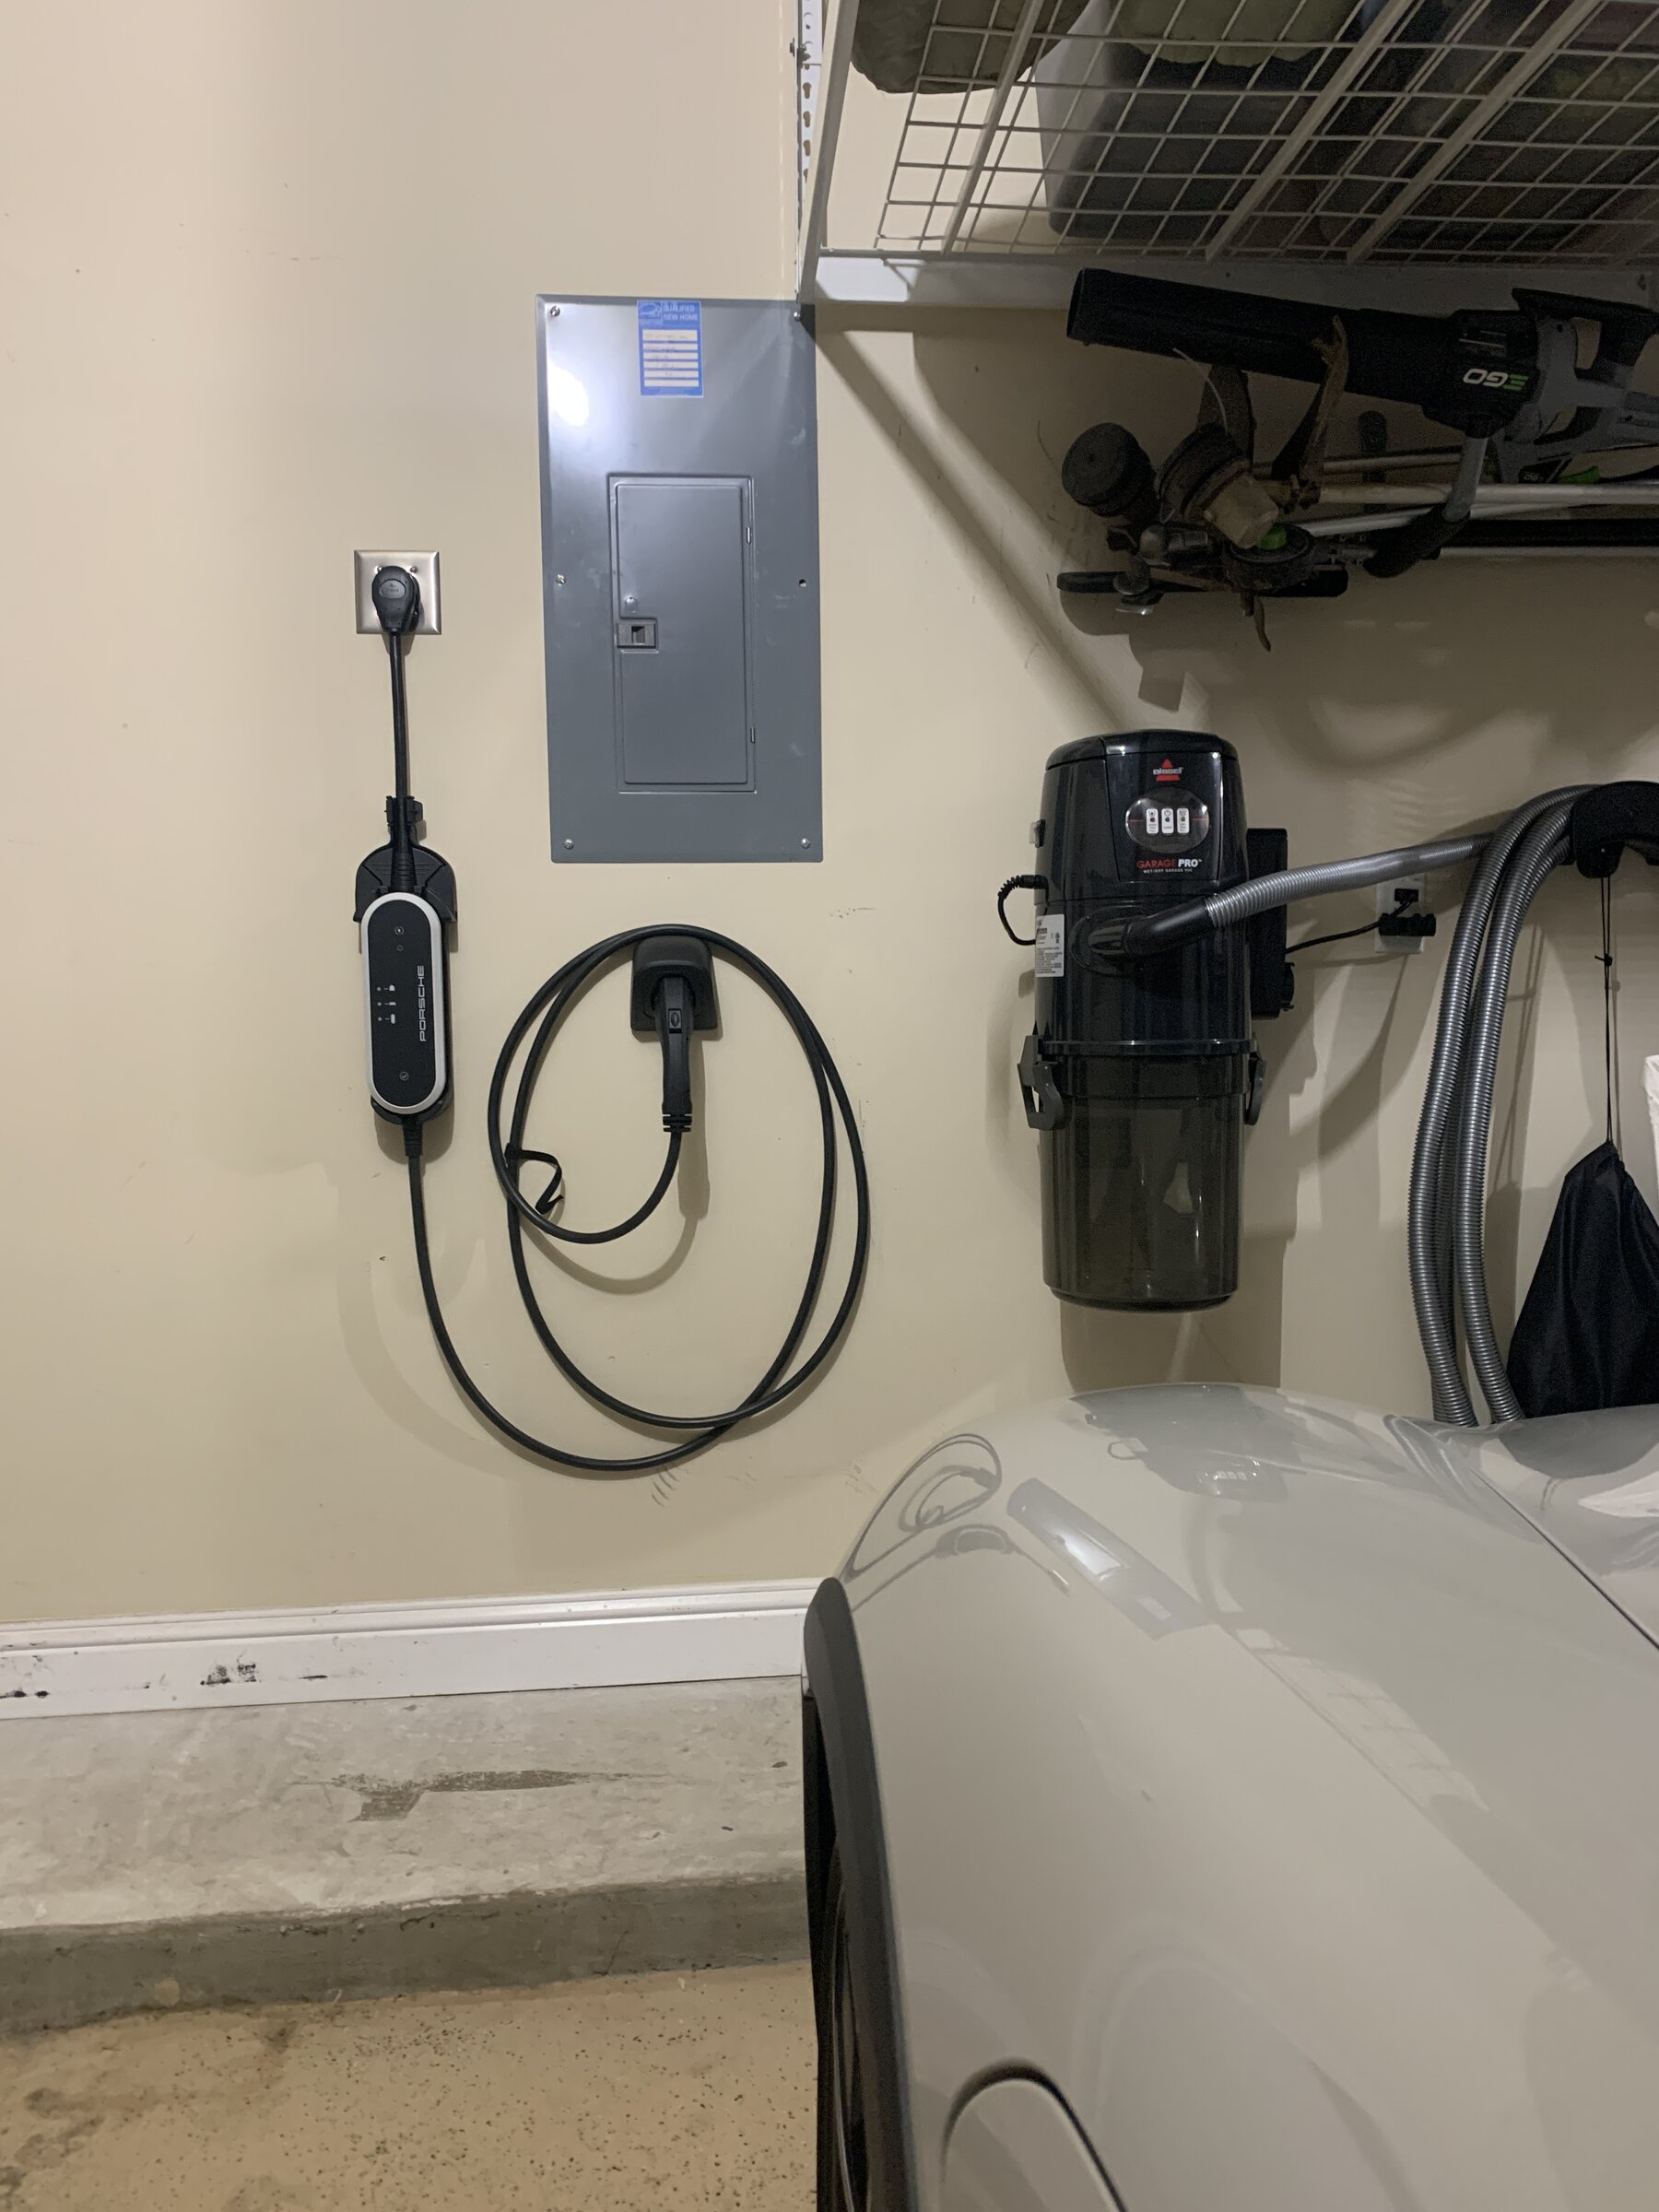 Porsche Taycan Show your home charging setup for your Taycan EB7097F8-5AEE-46D7-8F27-2B5490A665F8